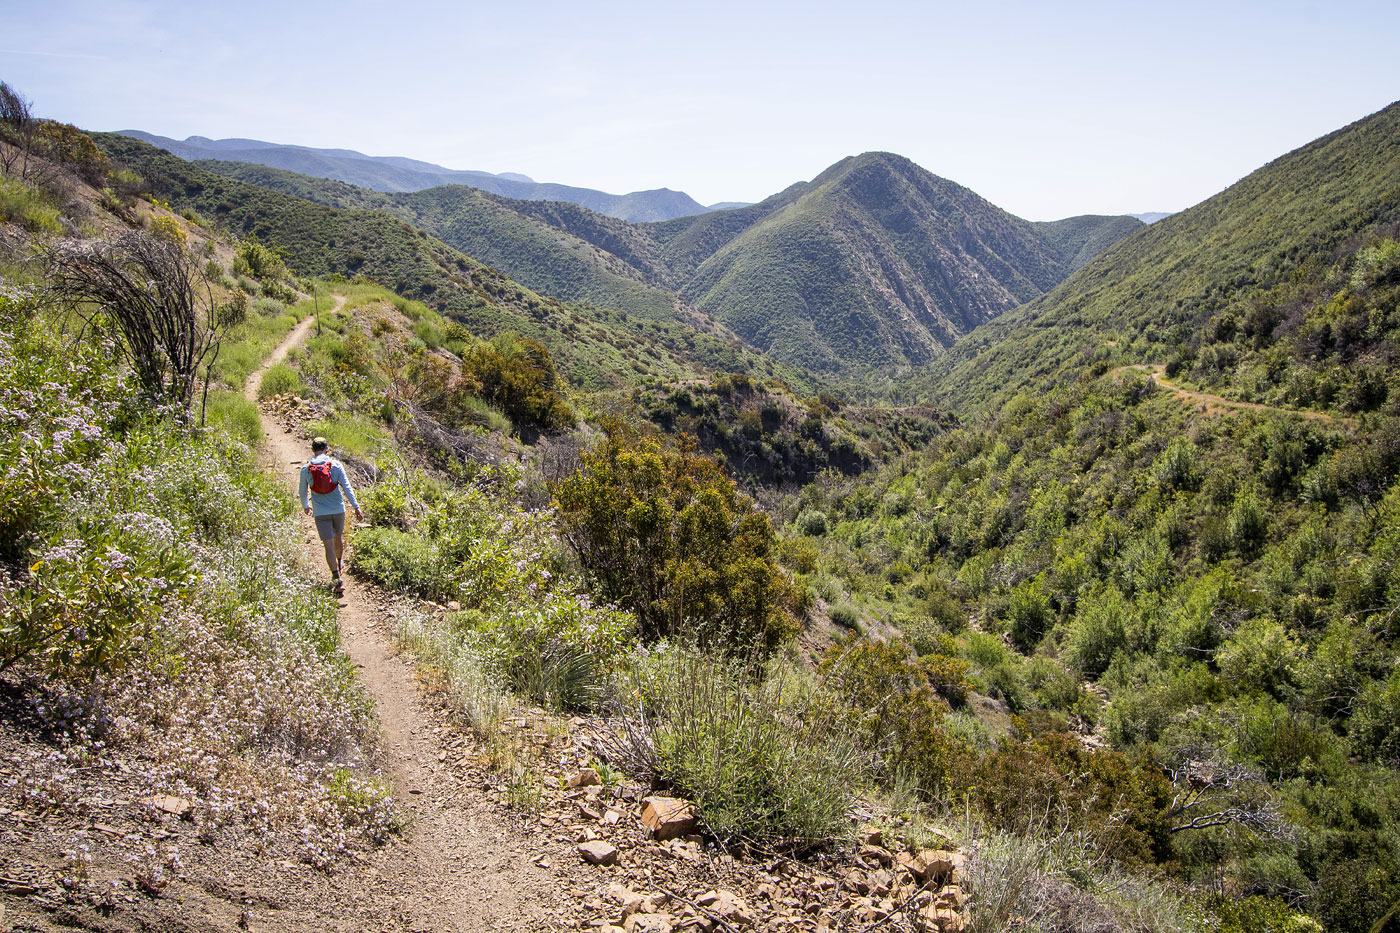 Hike Nordhoff Peak via Gridley Trail in Los Padres National Forest, California - Stav is Lost